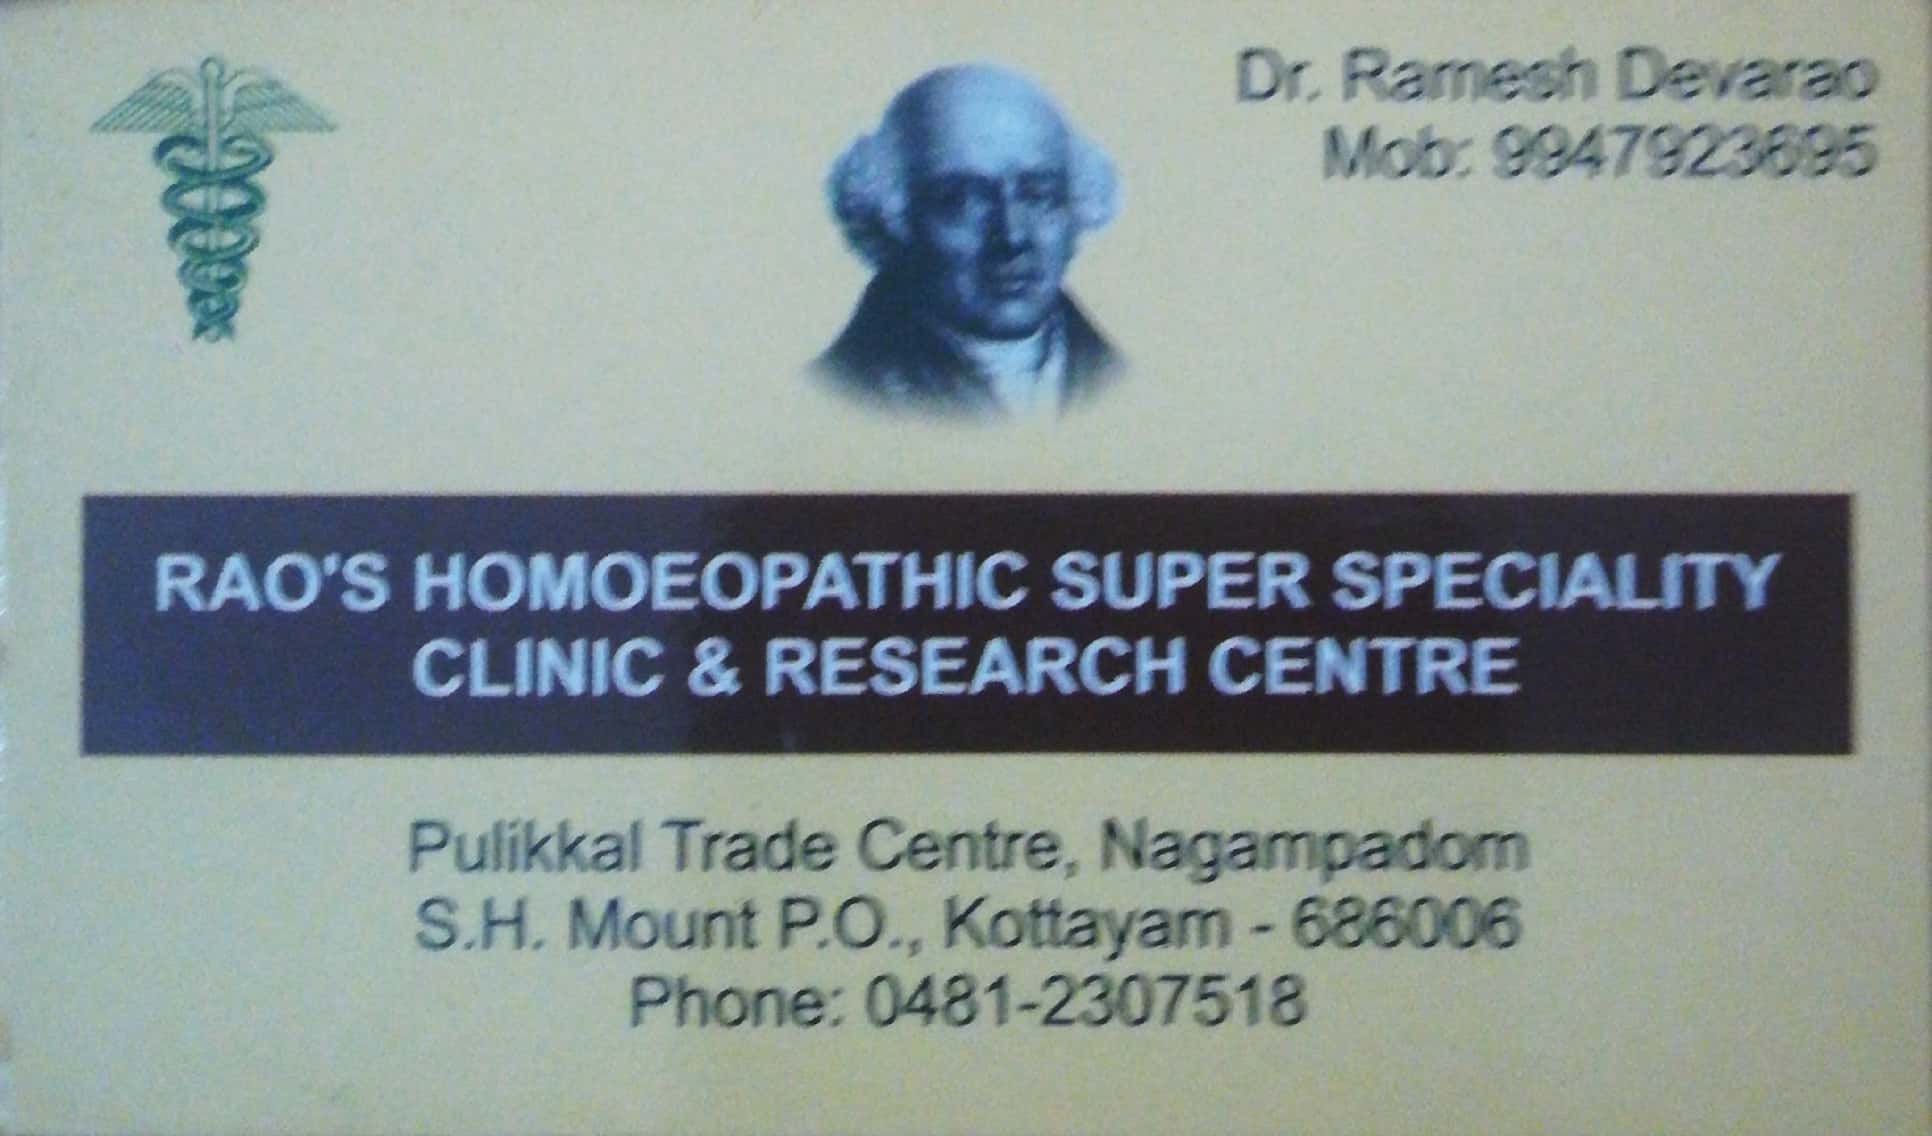 RAO HOMEOPATHIC SUPER SPECIALITY CLINIC, HOMEOPATHY HOSPITAL,  service in Kottayam, Kottayam